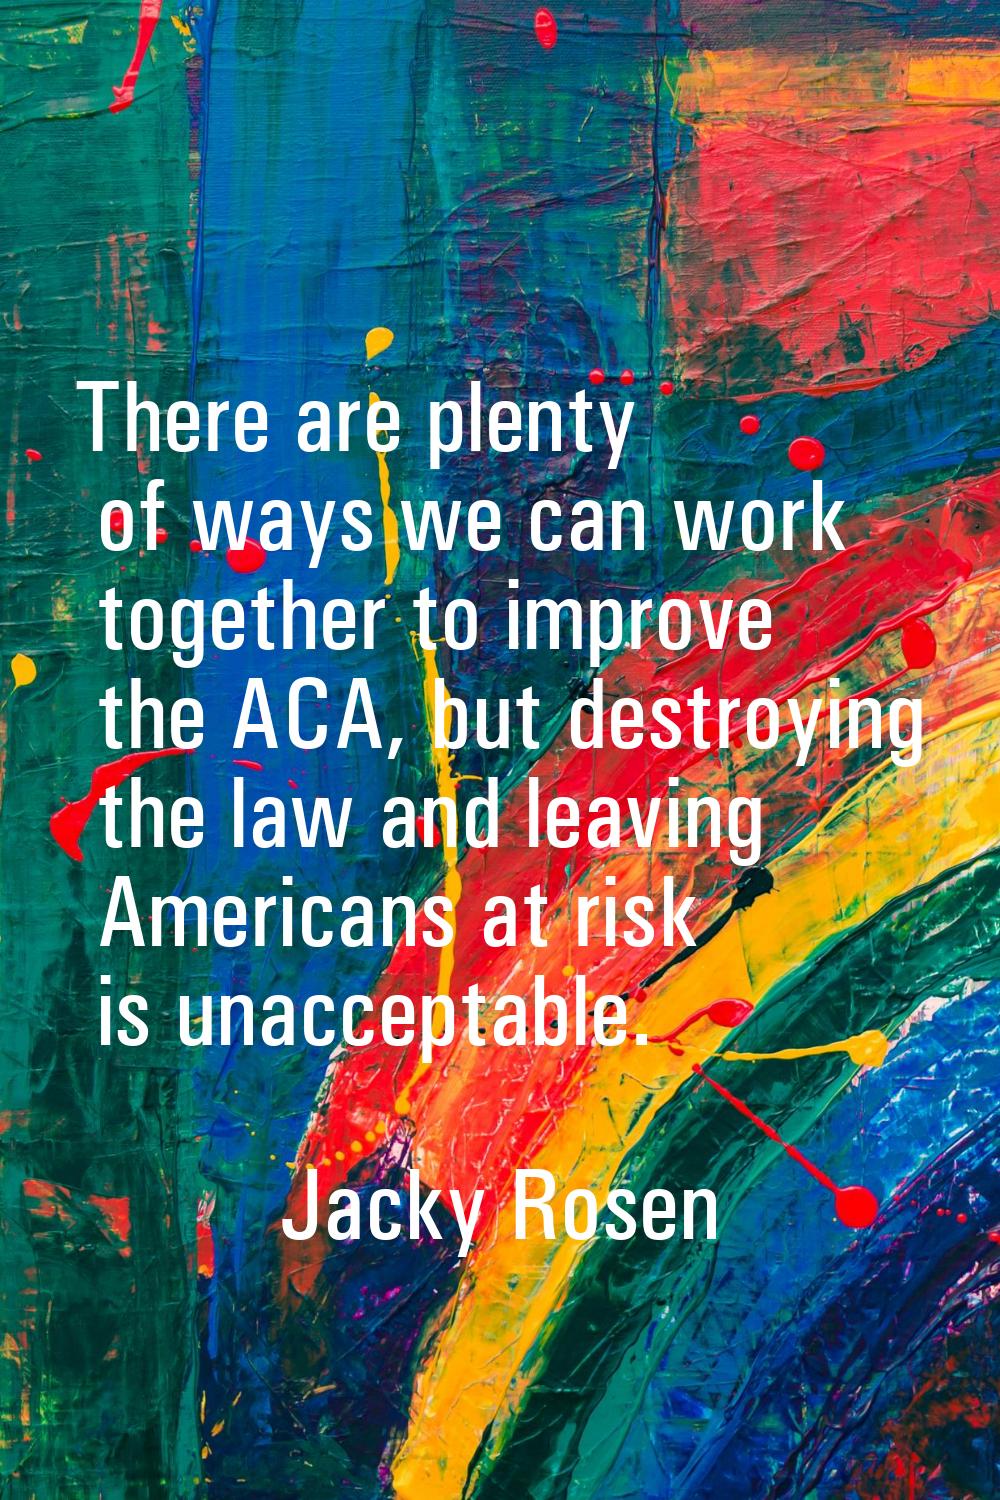 There are plenty of ways we can work together to improve the ACA, but destroying the law and leavin